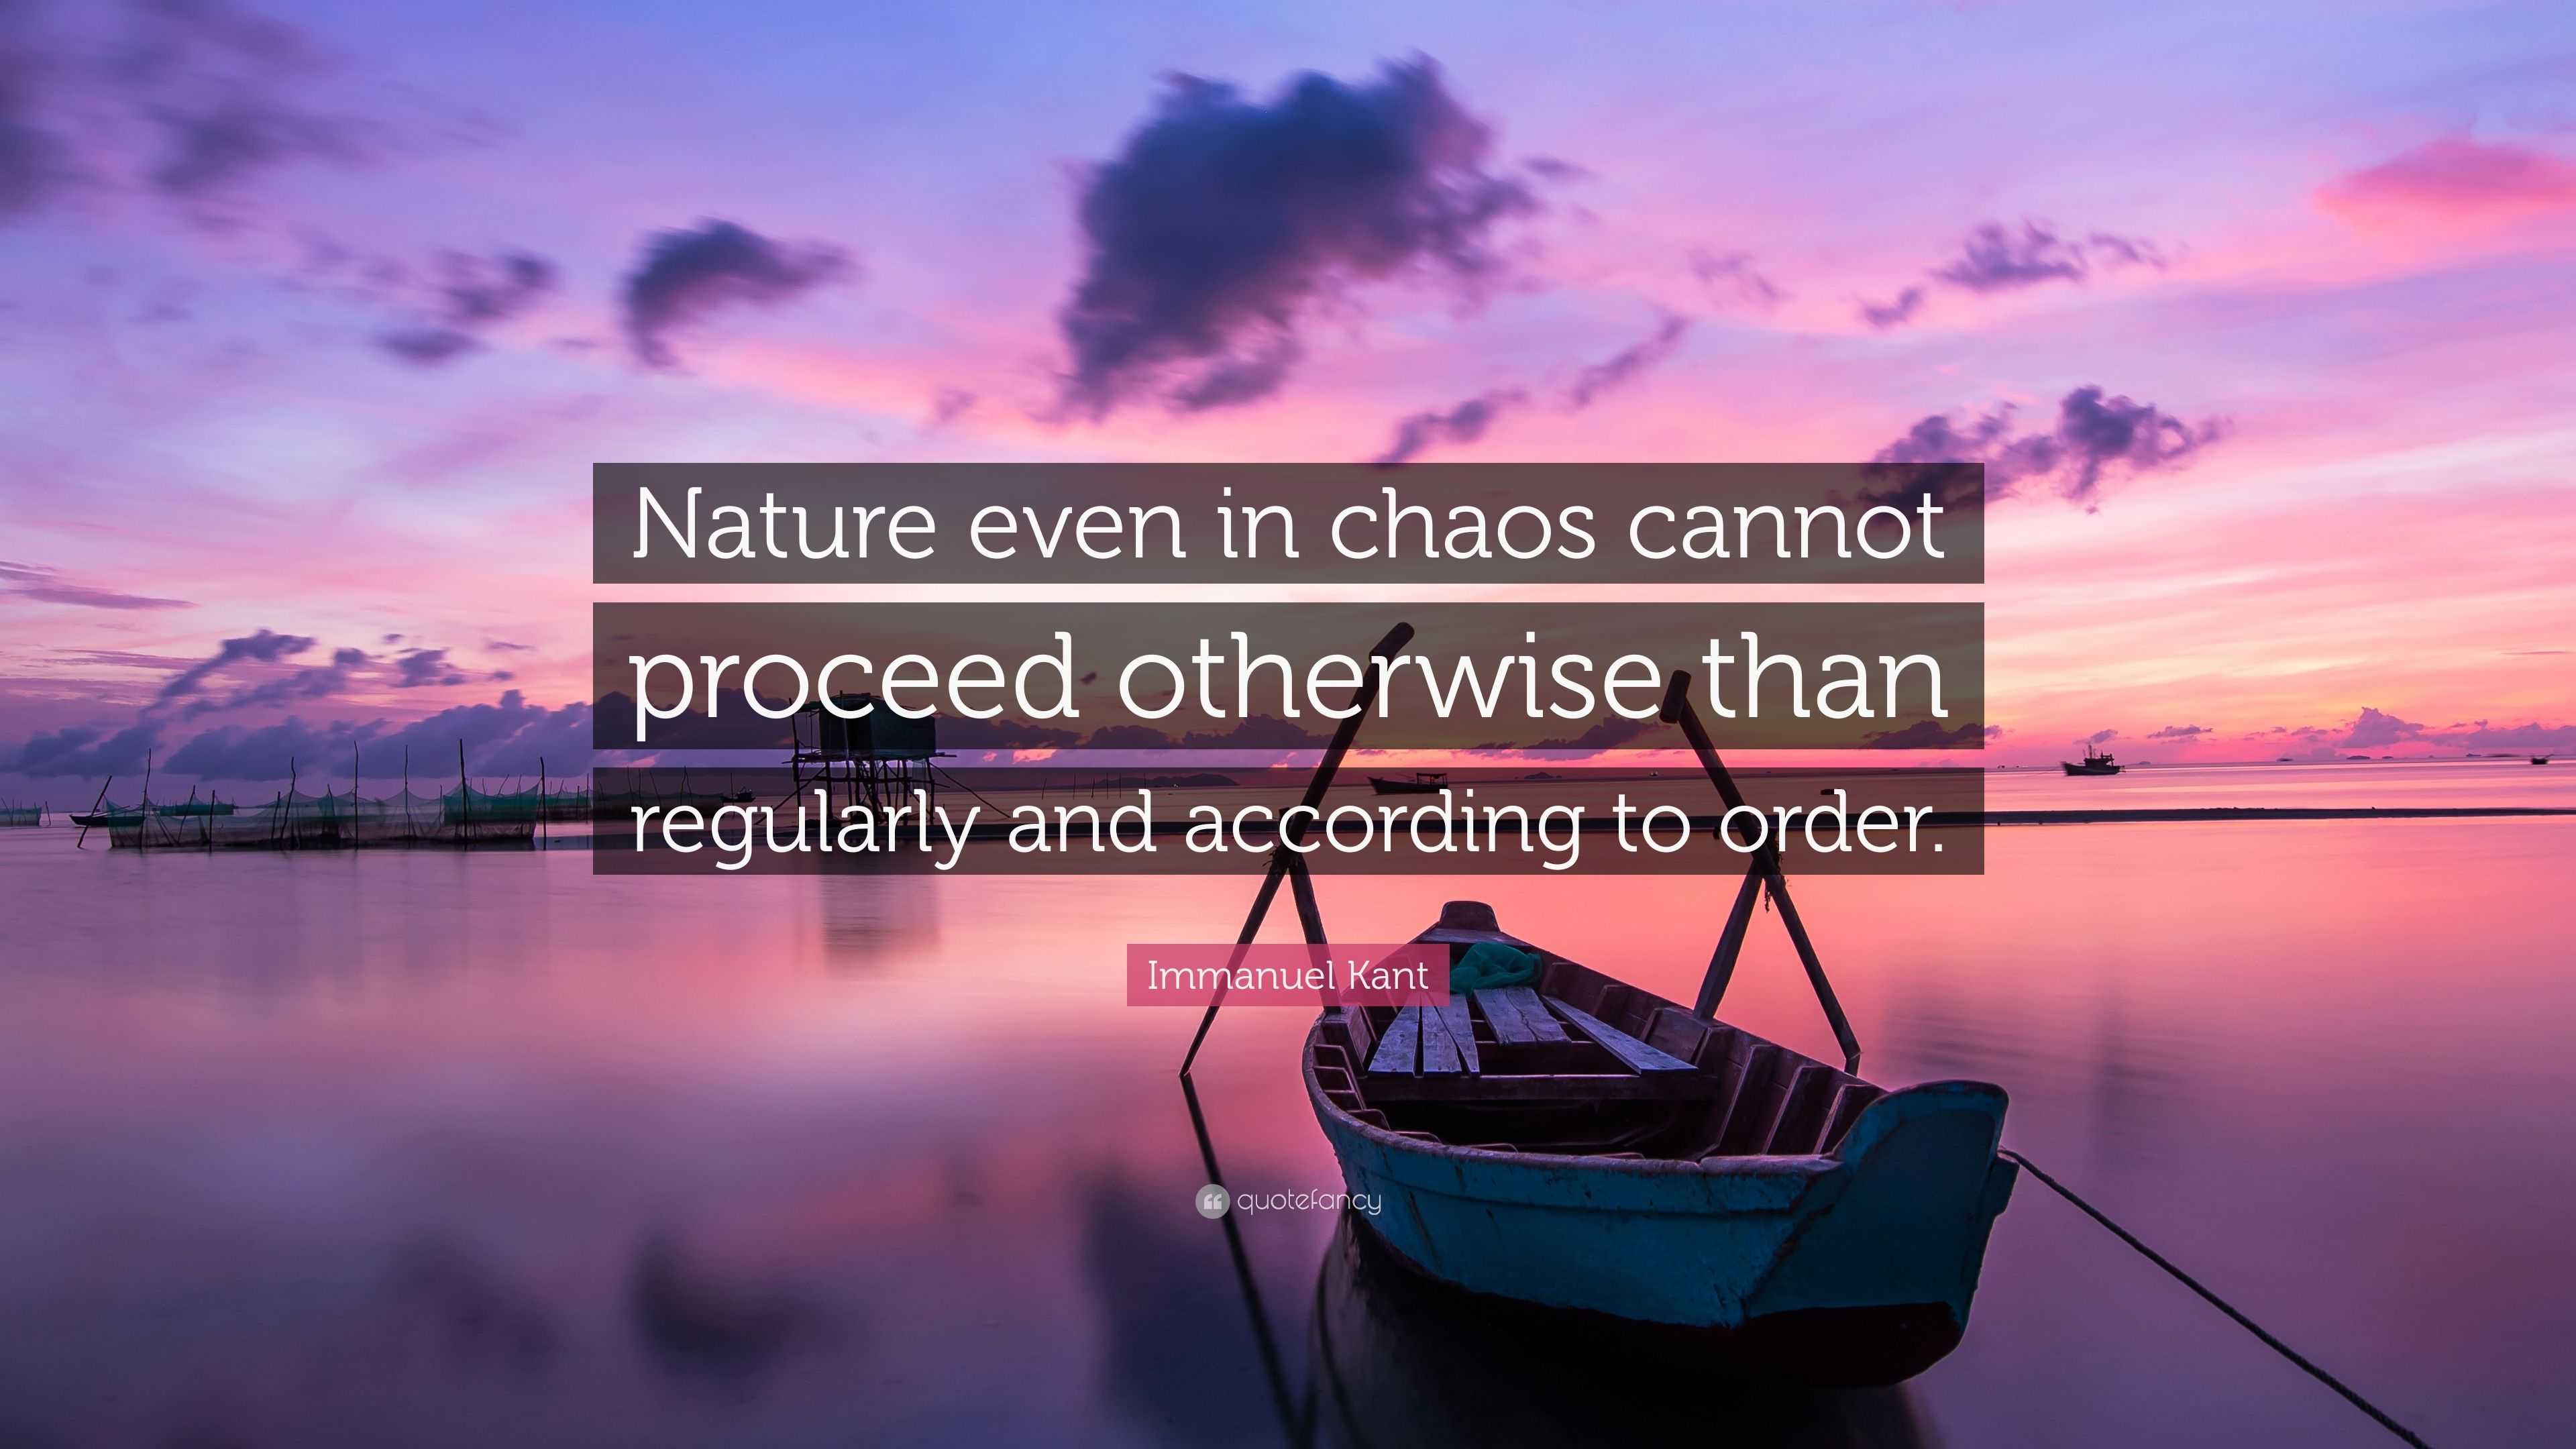 Immanuel Kant Quote: “Nature even in chaos cannot proceed otherwise ...